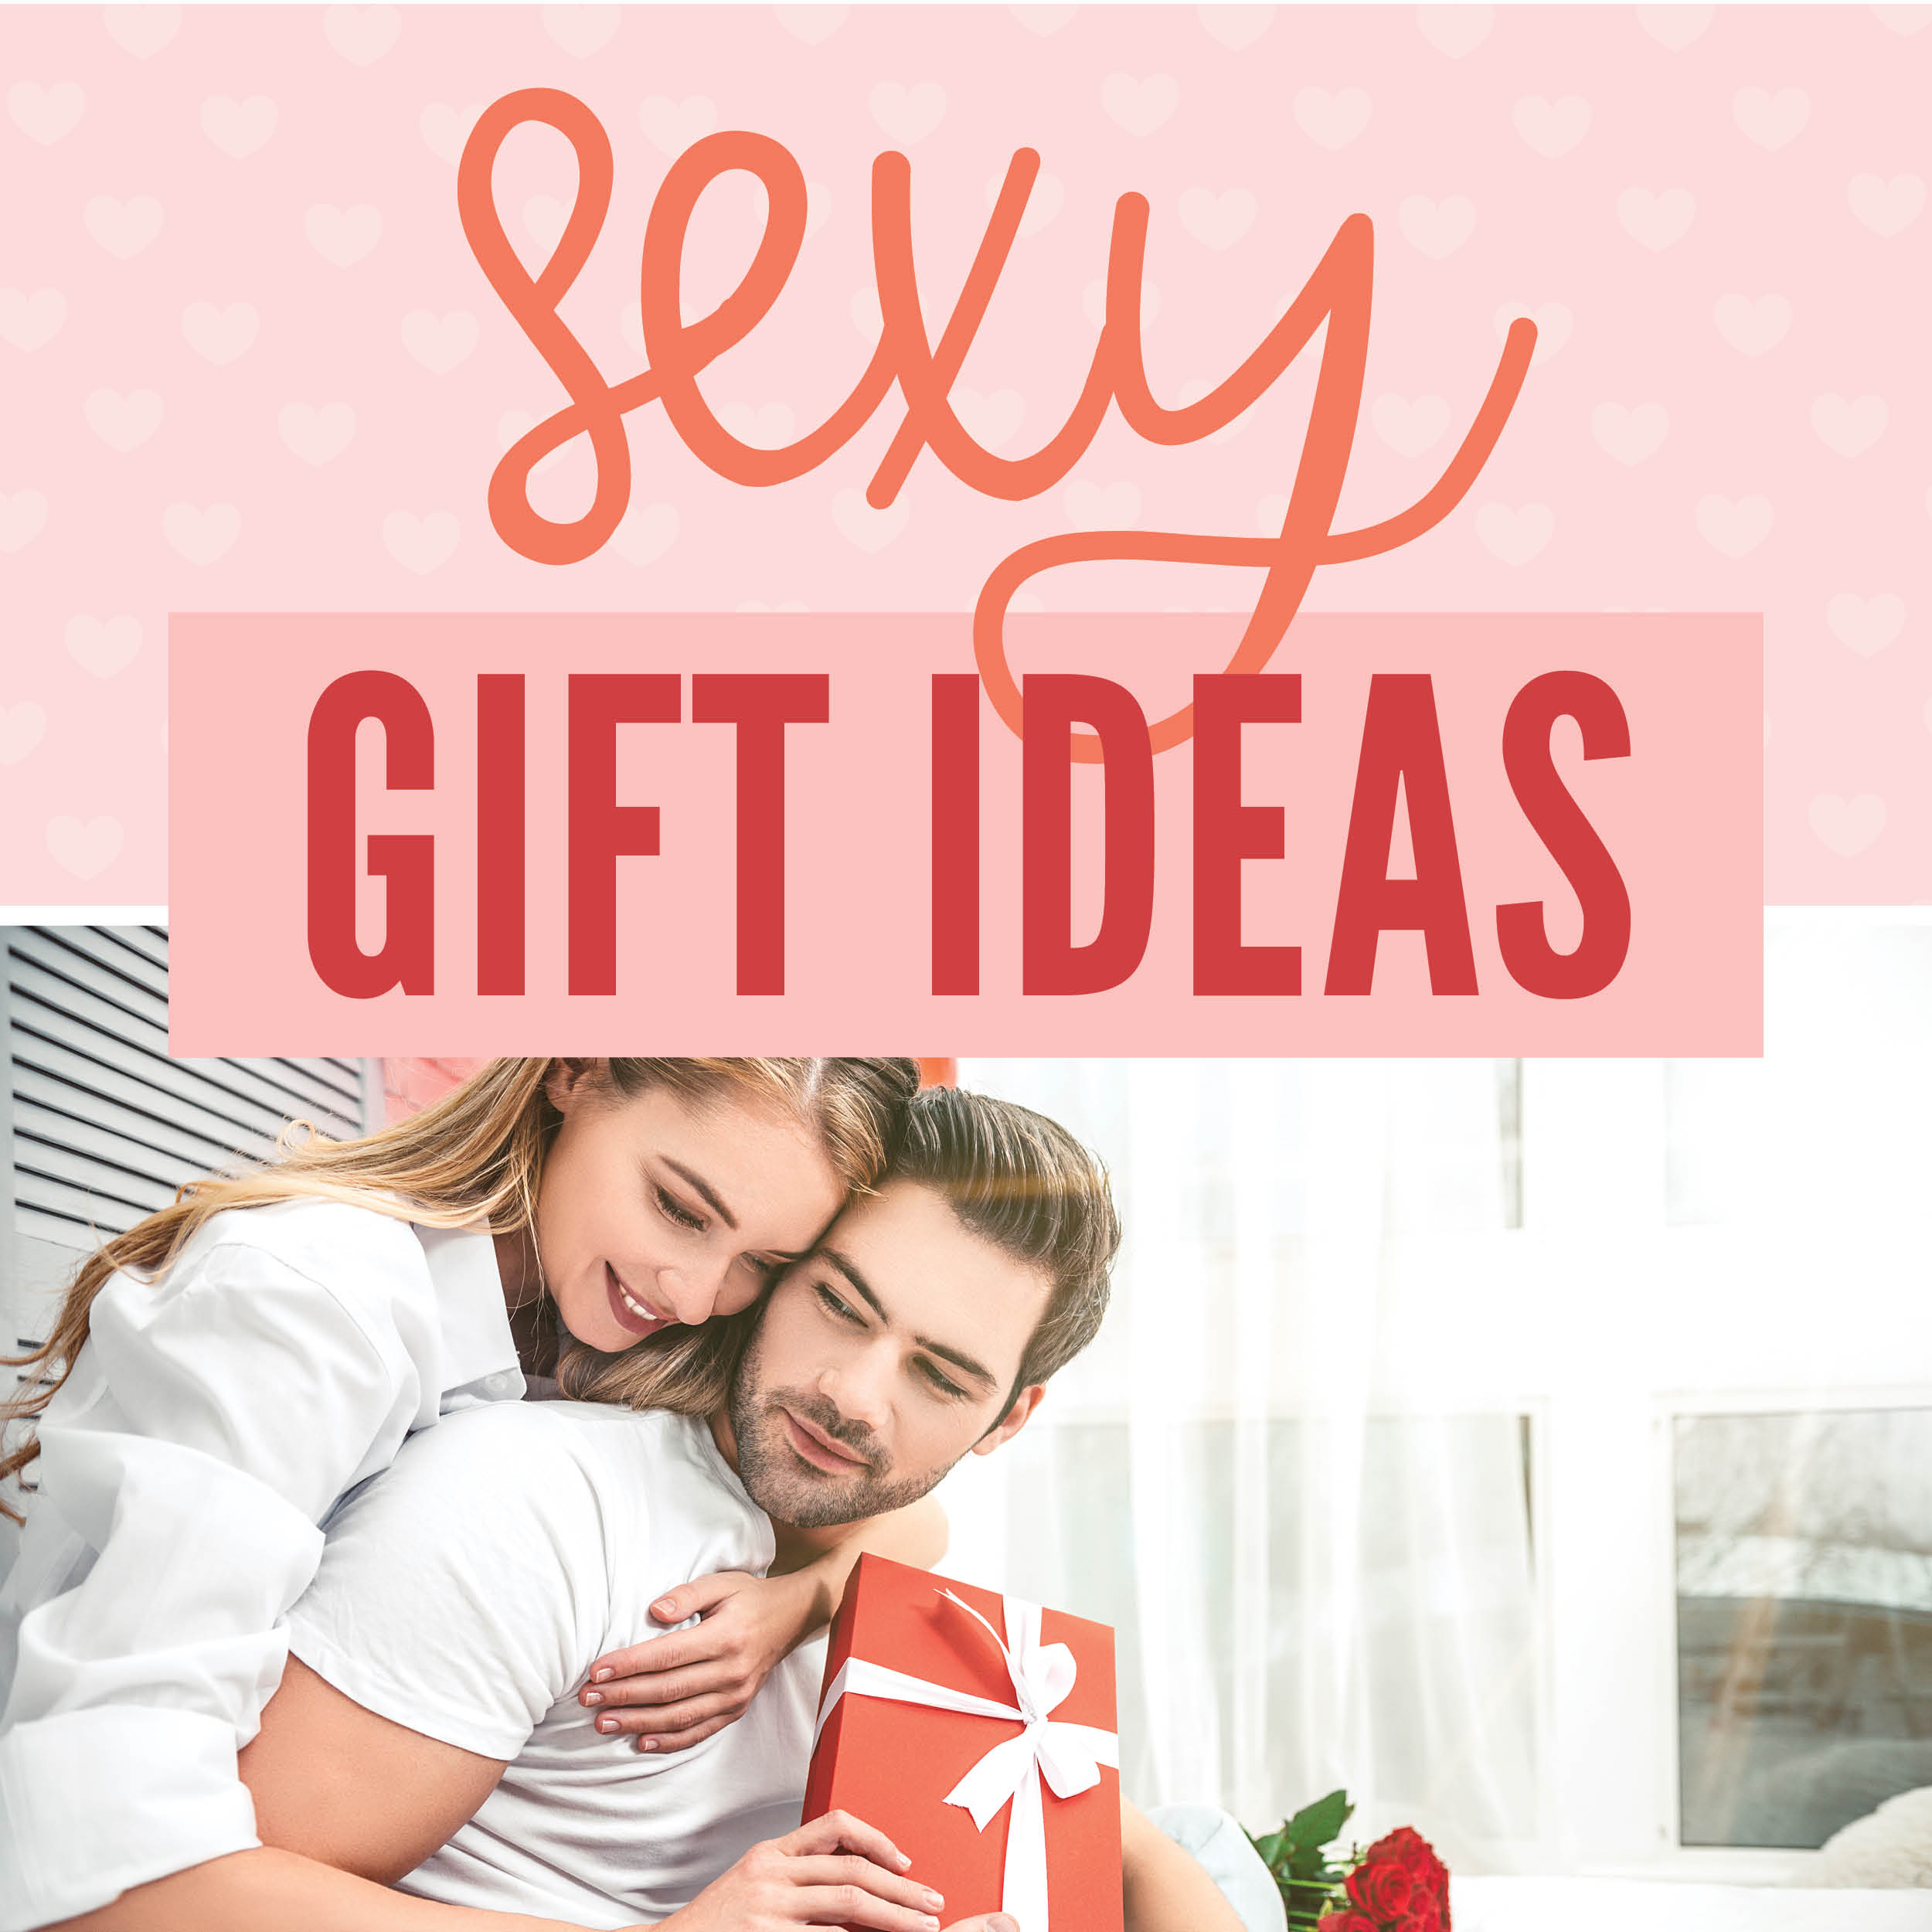 erotic gifts for your wife sex scene